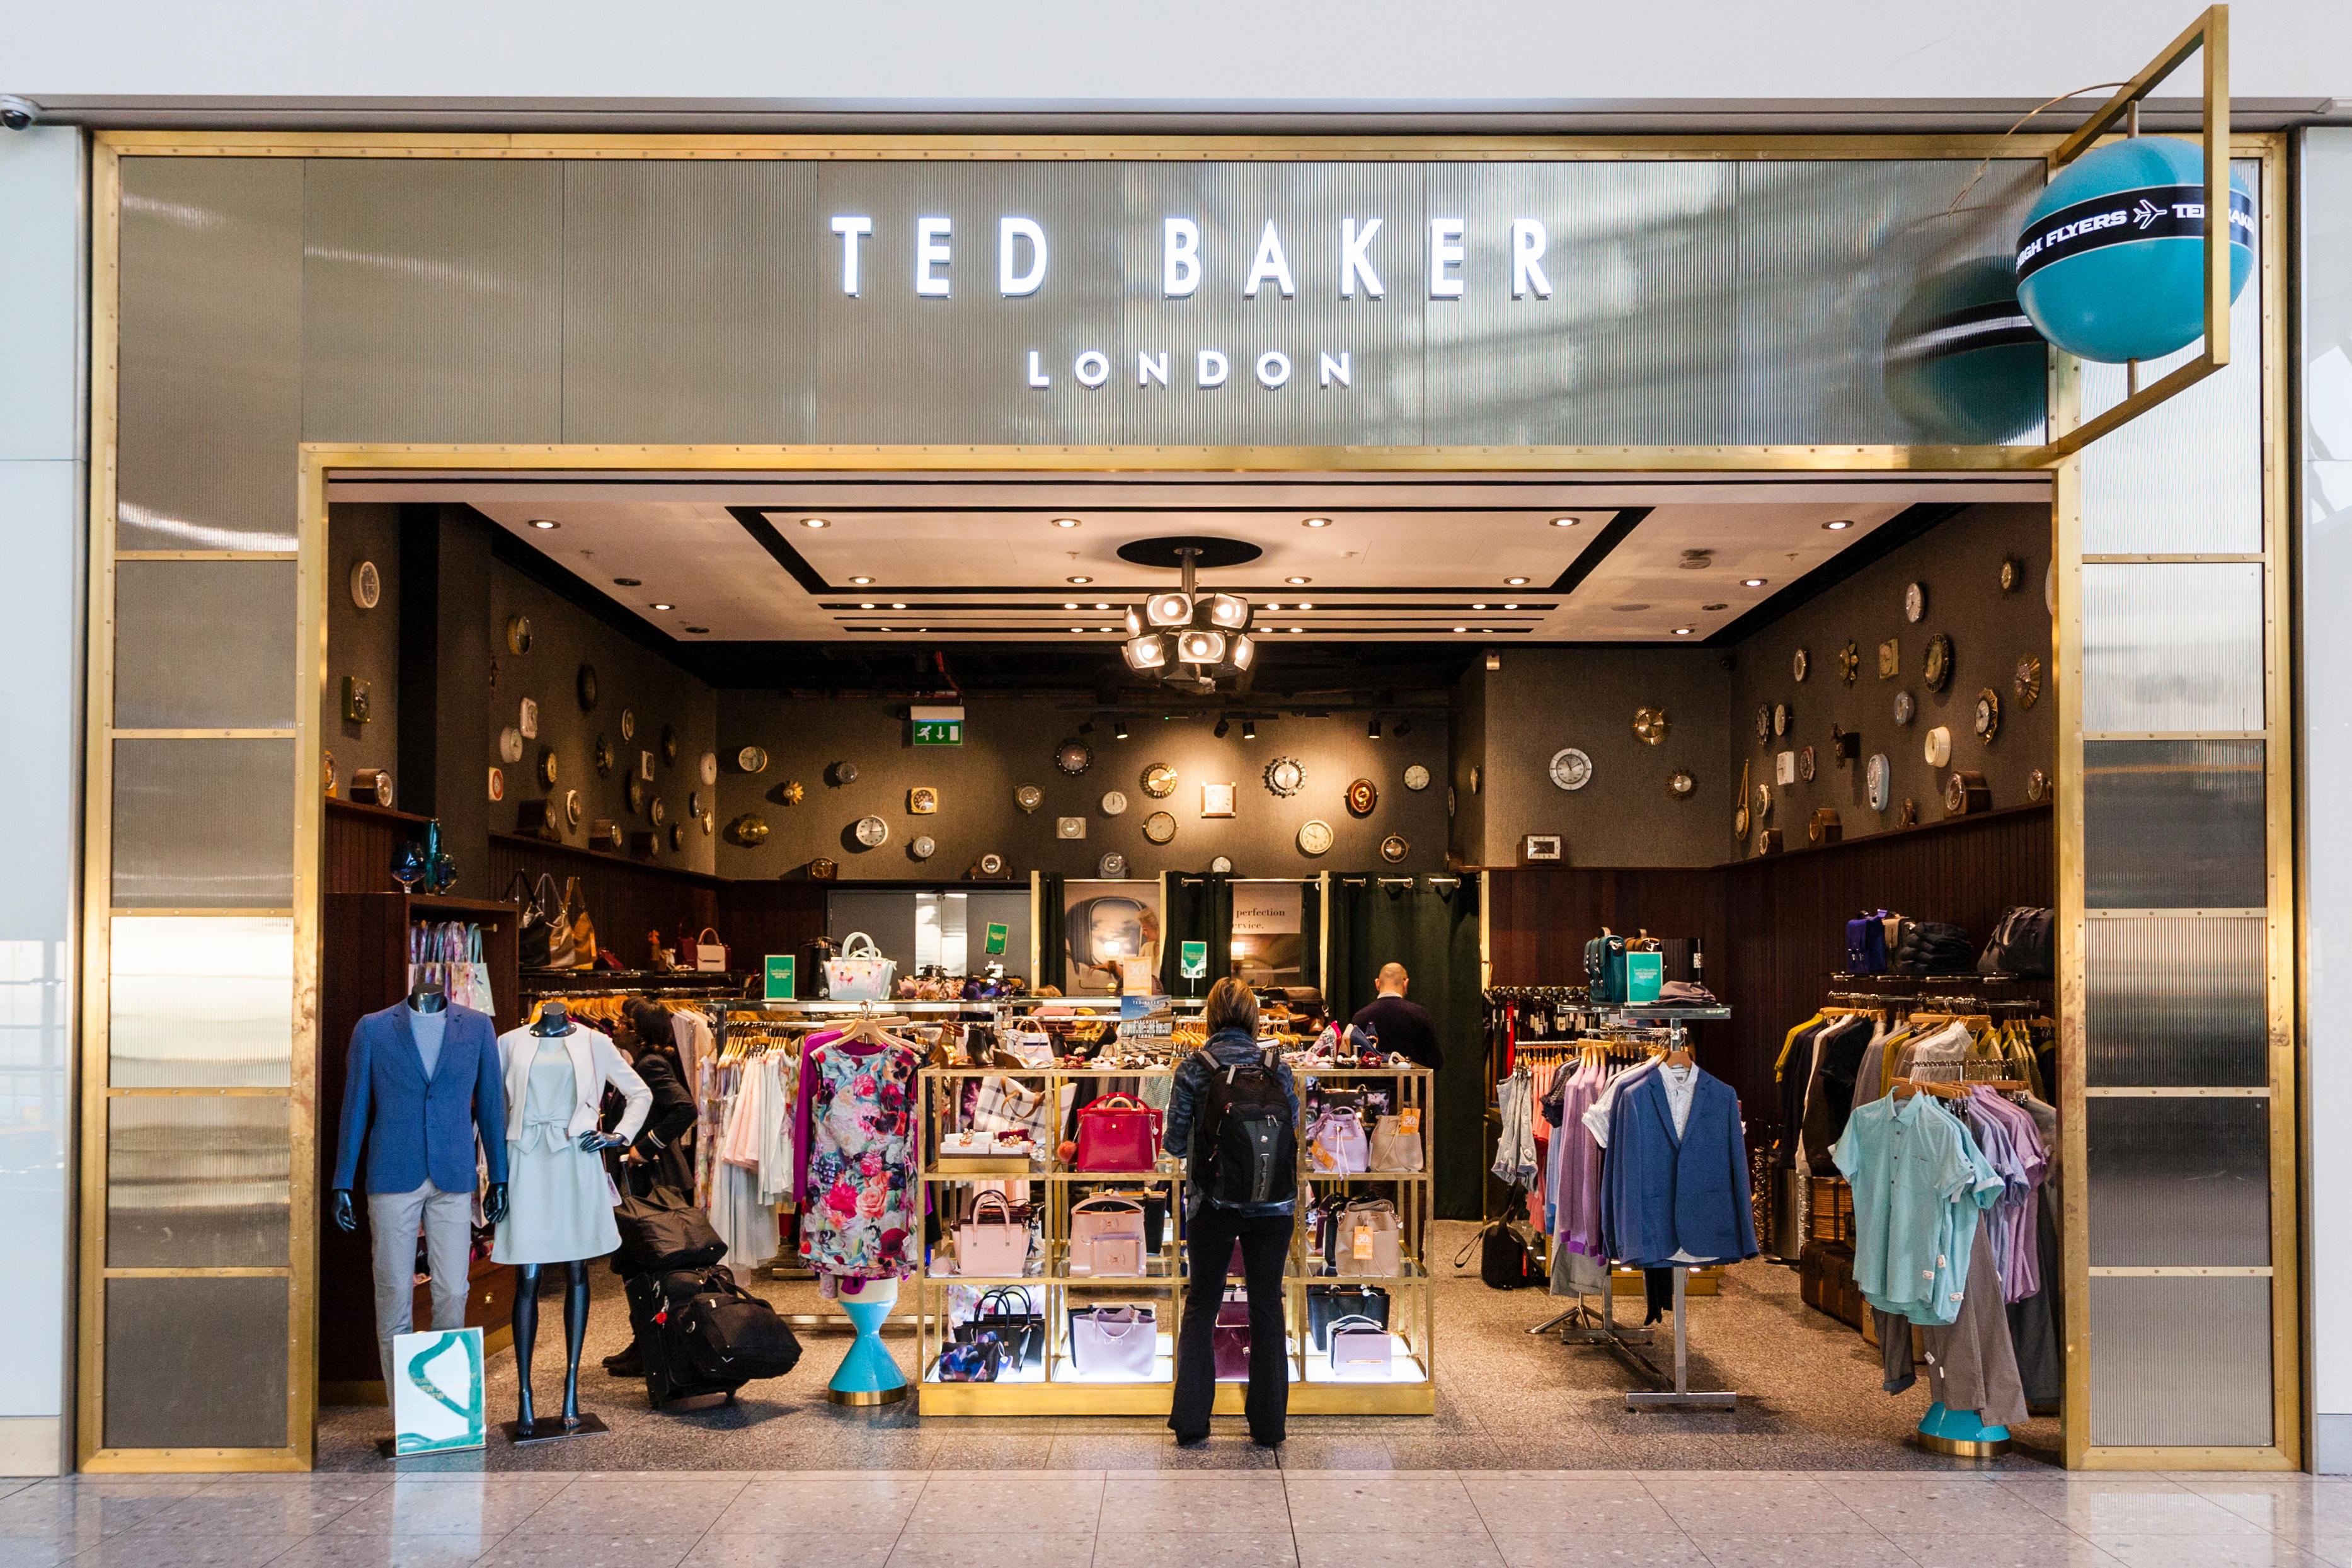 Ted Baker operates hundreds of stores worldwide and currently operates out of 86 locations in the UK